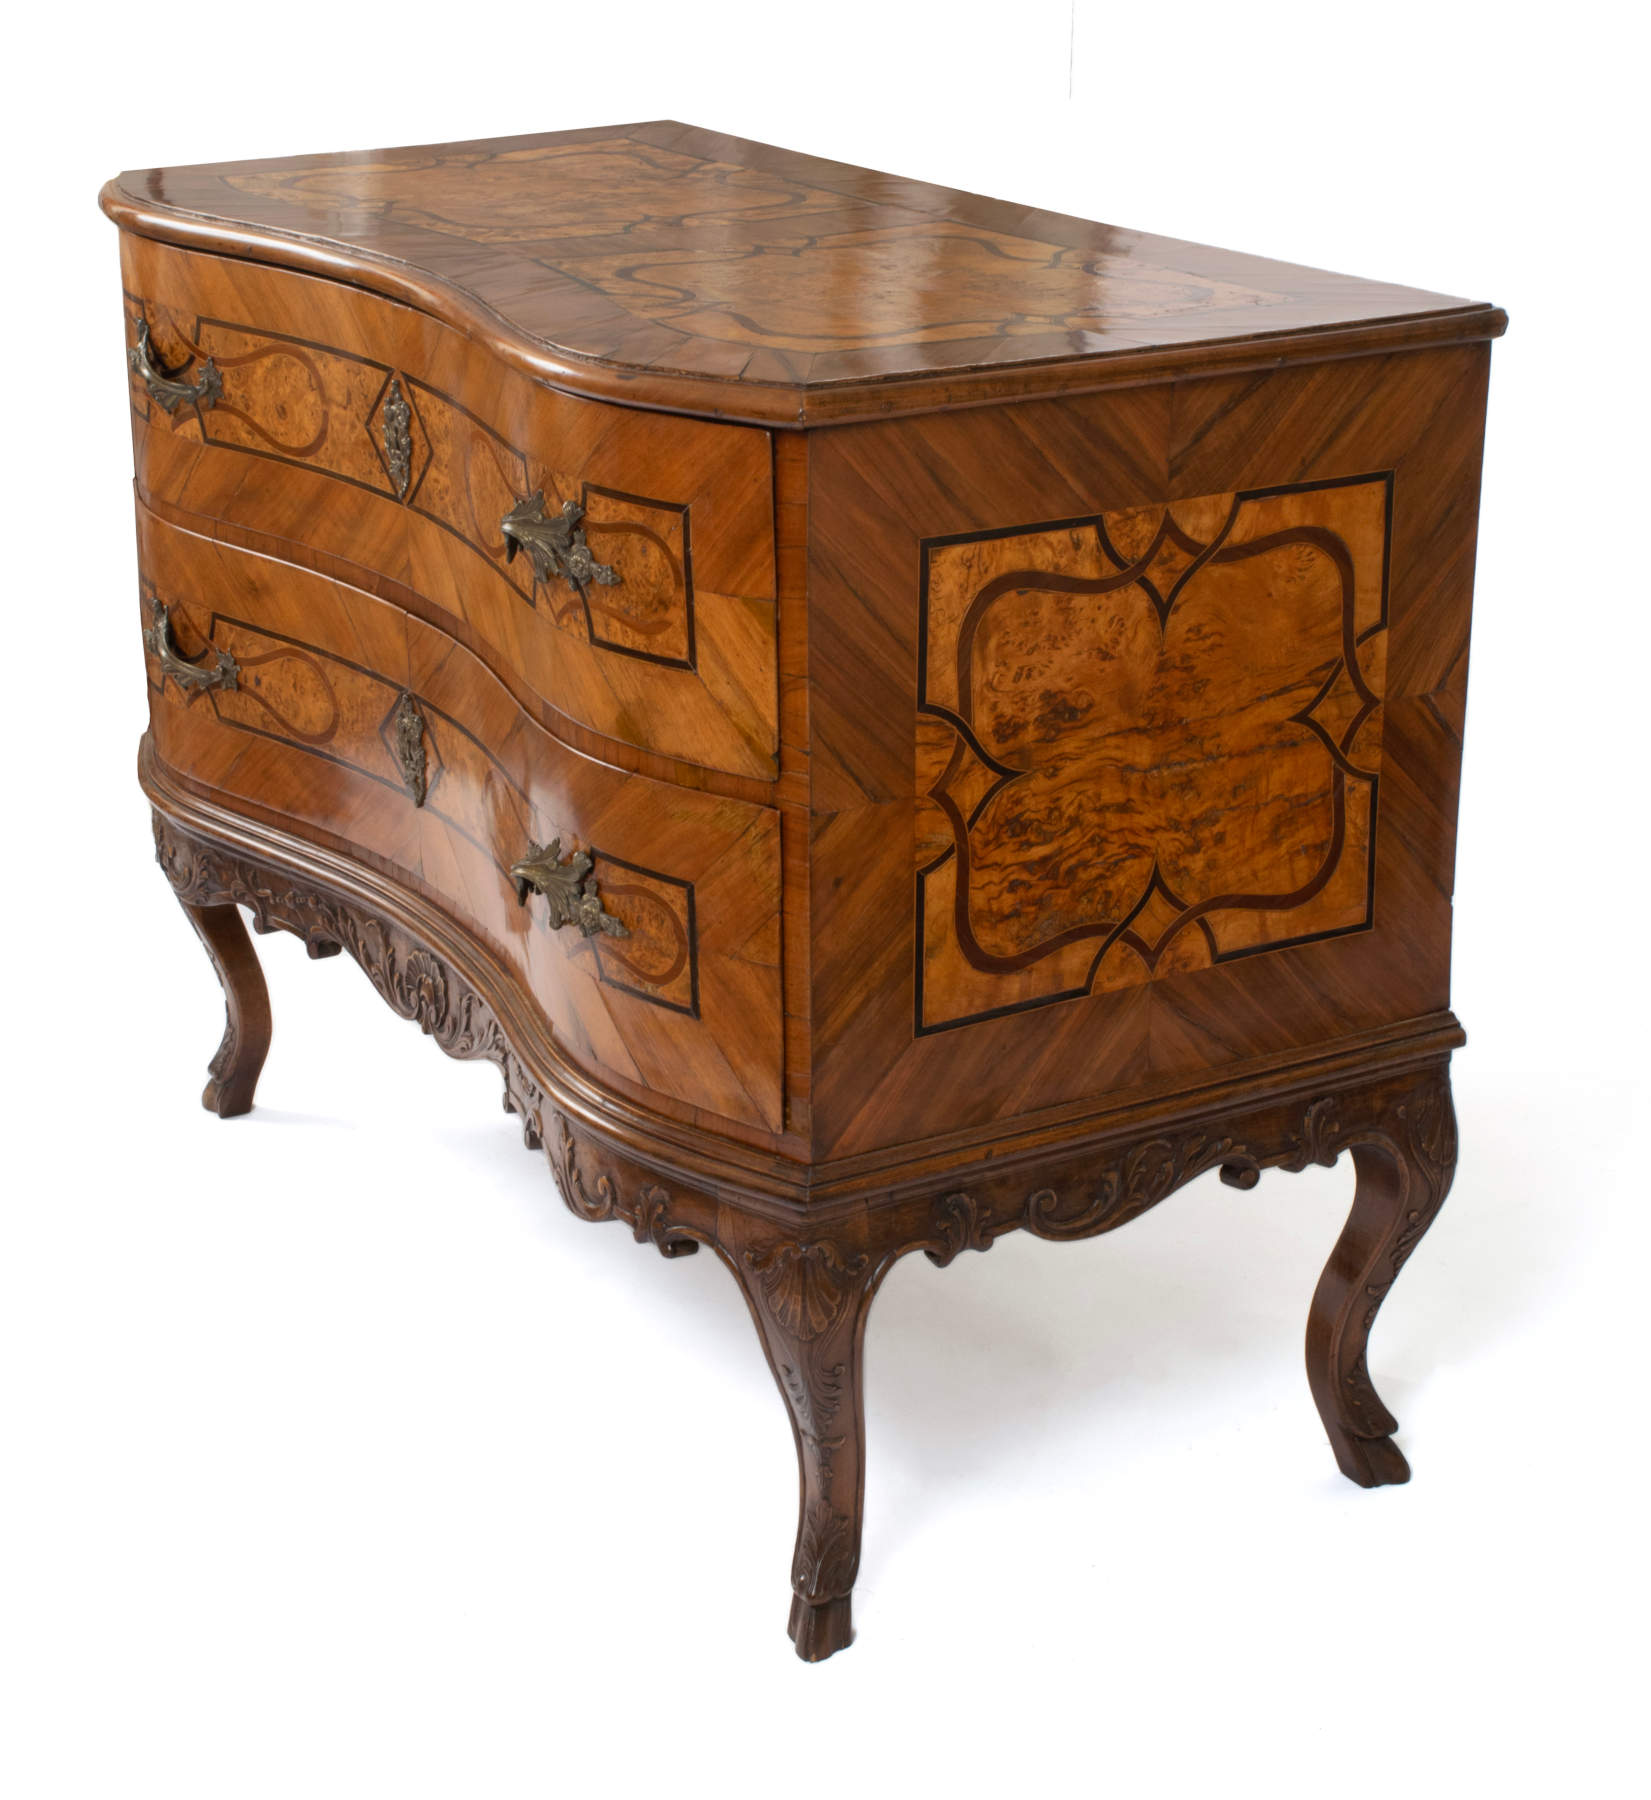 Italian Rococo Parquetry Chest of Drawers, c. 1760